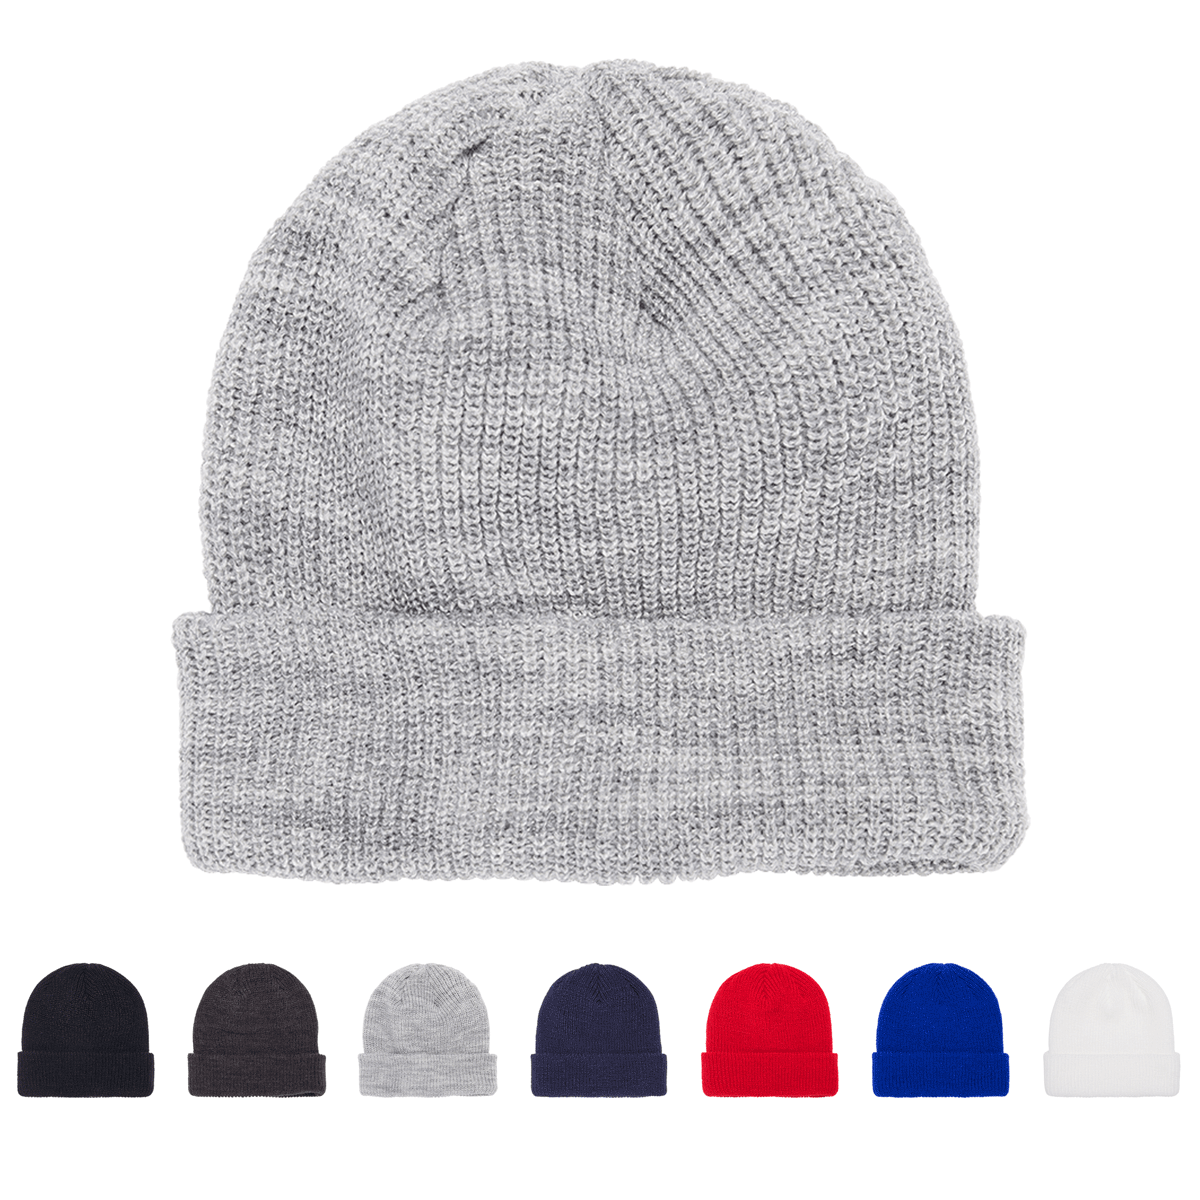 1545K YP Cap The Knit - Cuffed Wholesale – Classics® 1545K Yupoong Park Ribbed Beanie, Knit